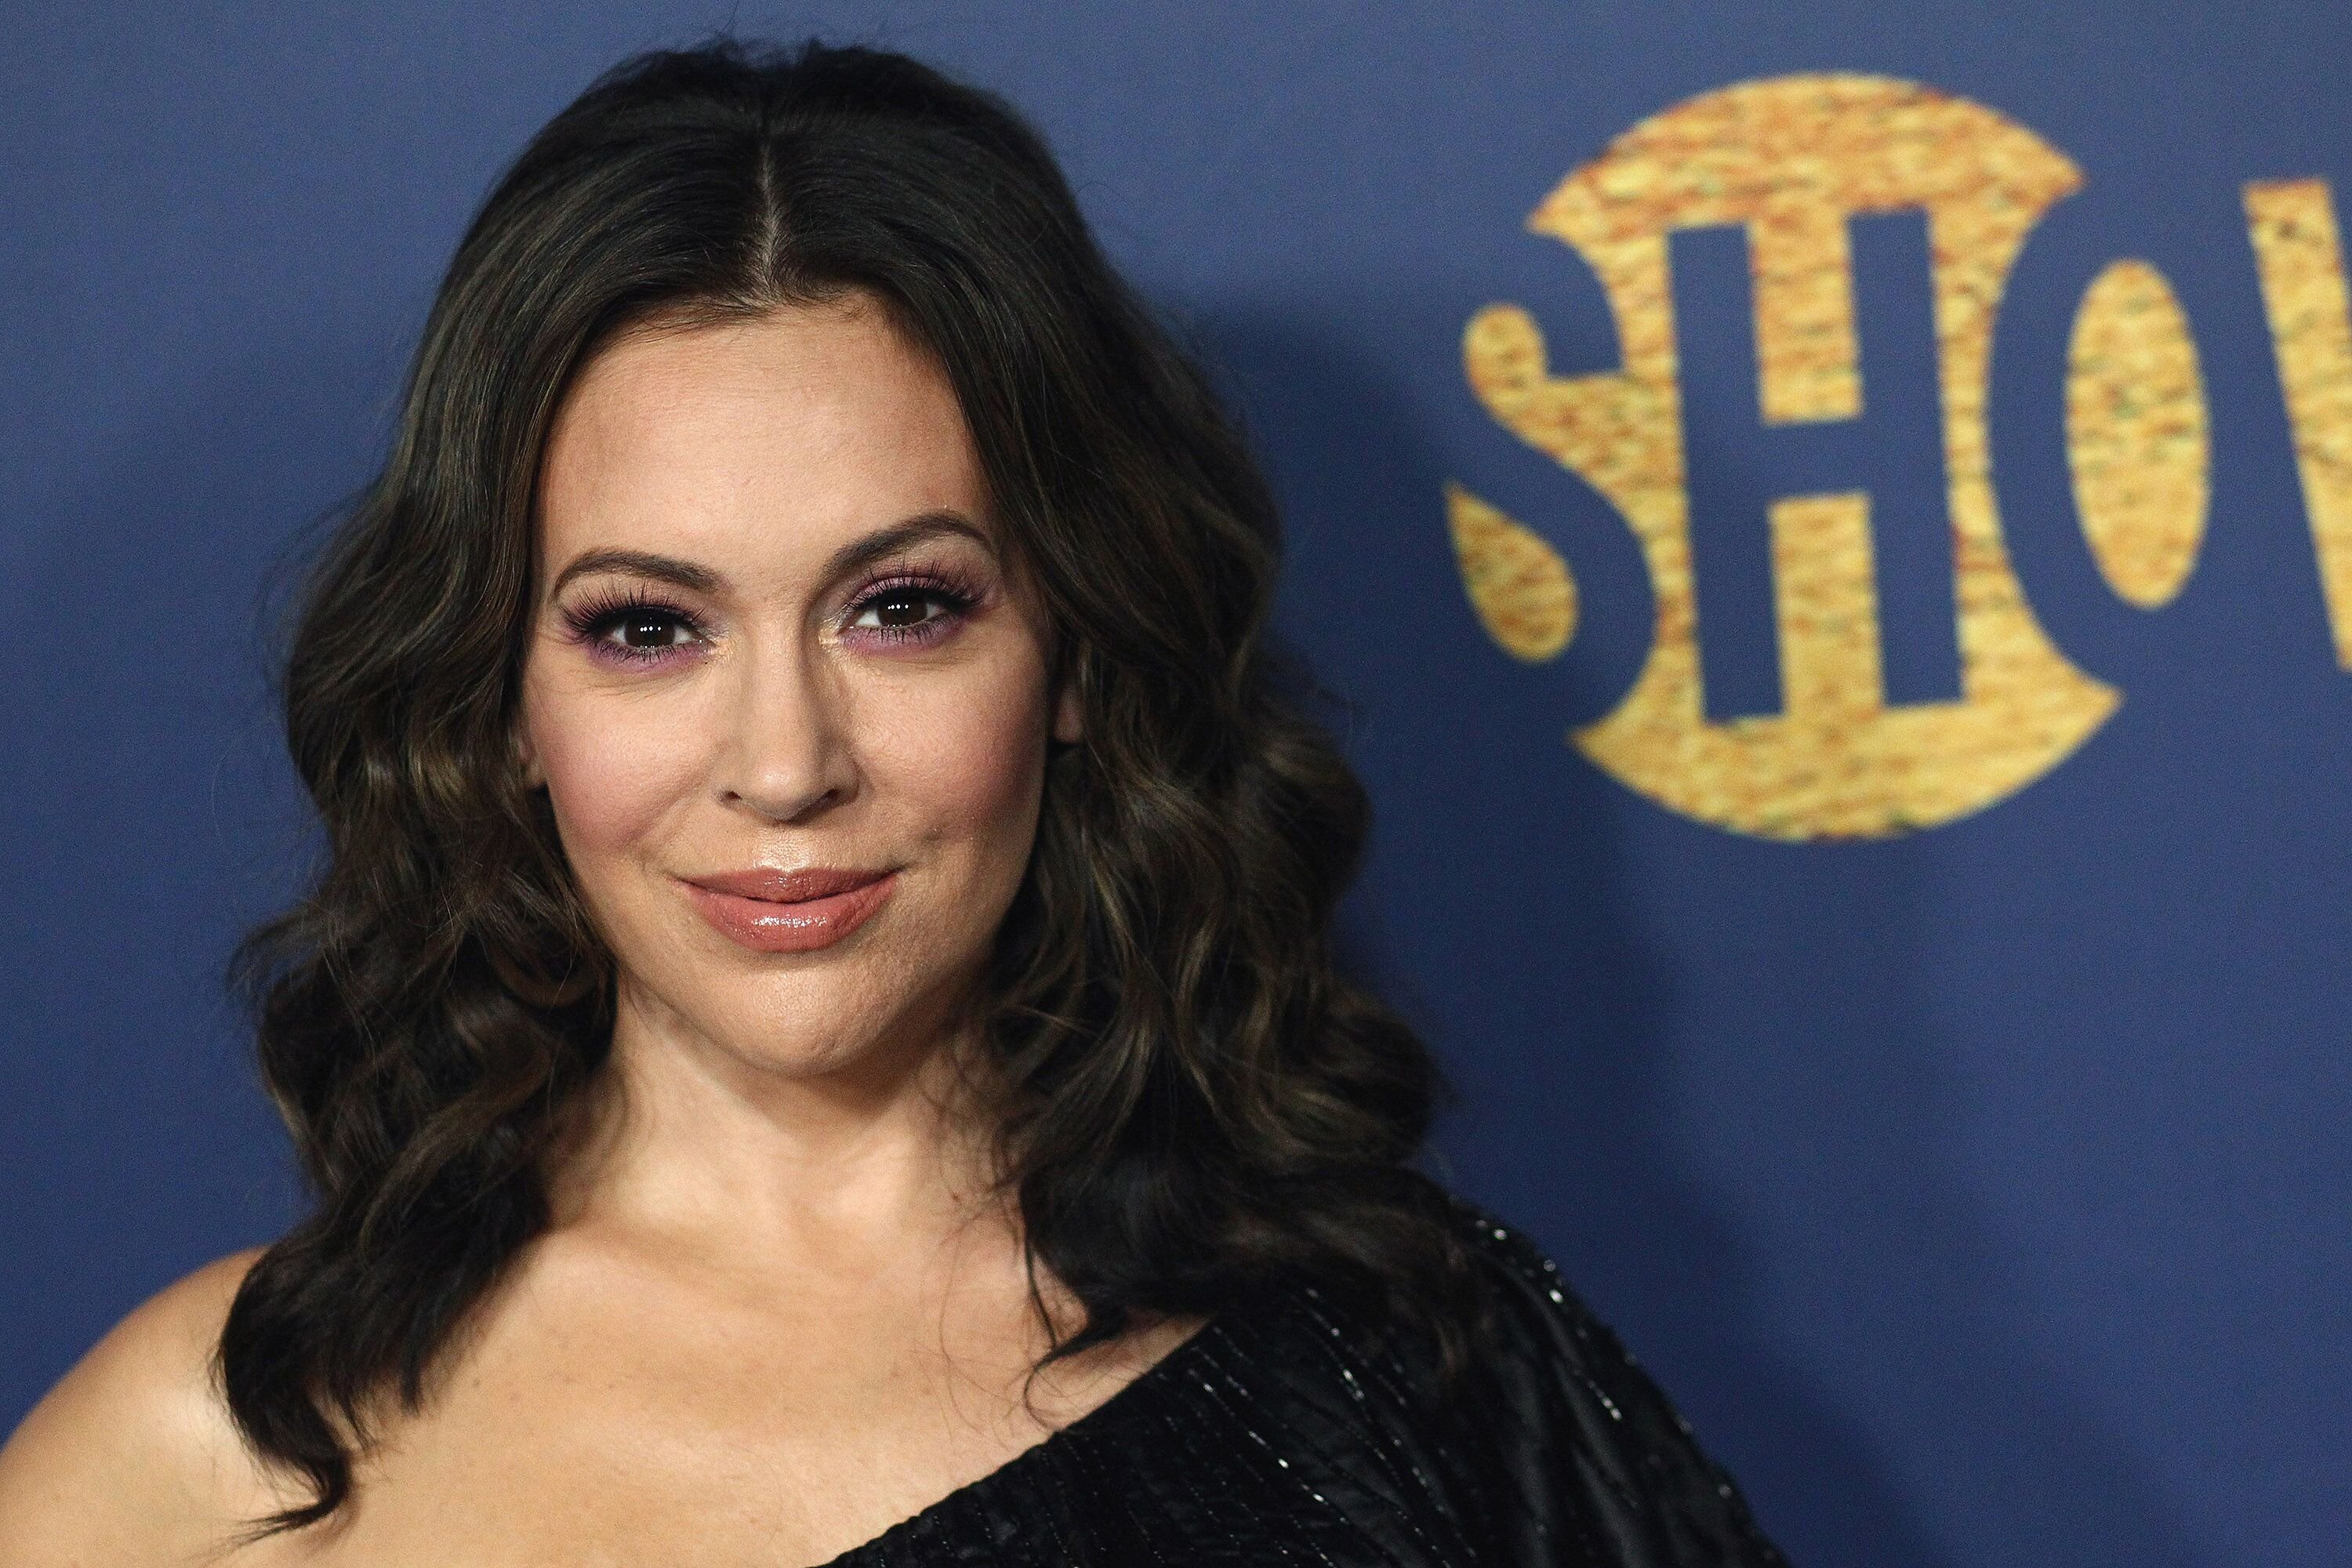 Alyssa Milano attends the Showtime Emmy Eve Nominees Celebration at Chateau Marmont | Getty Images